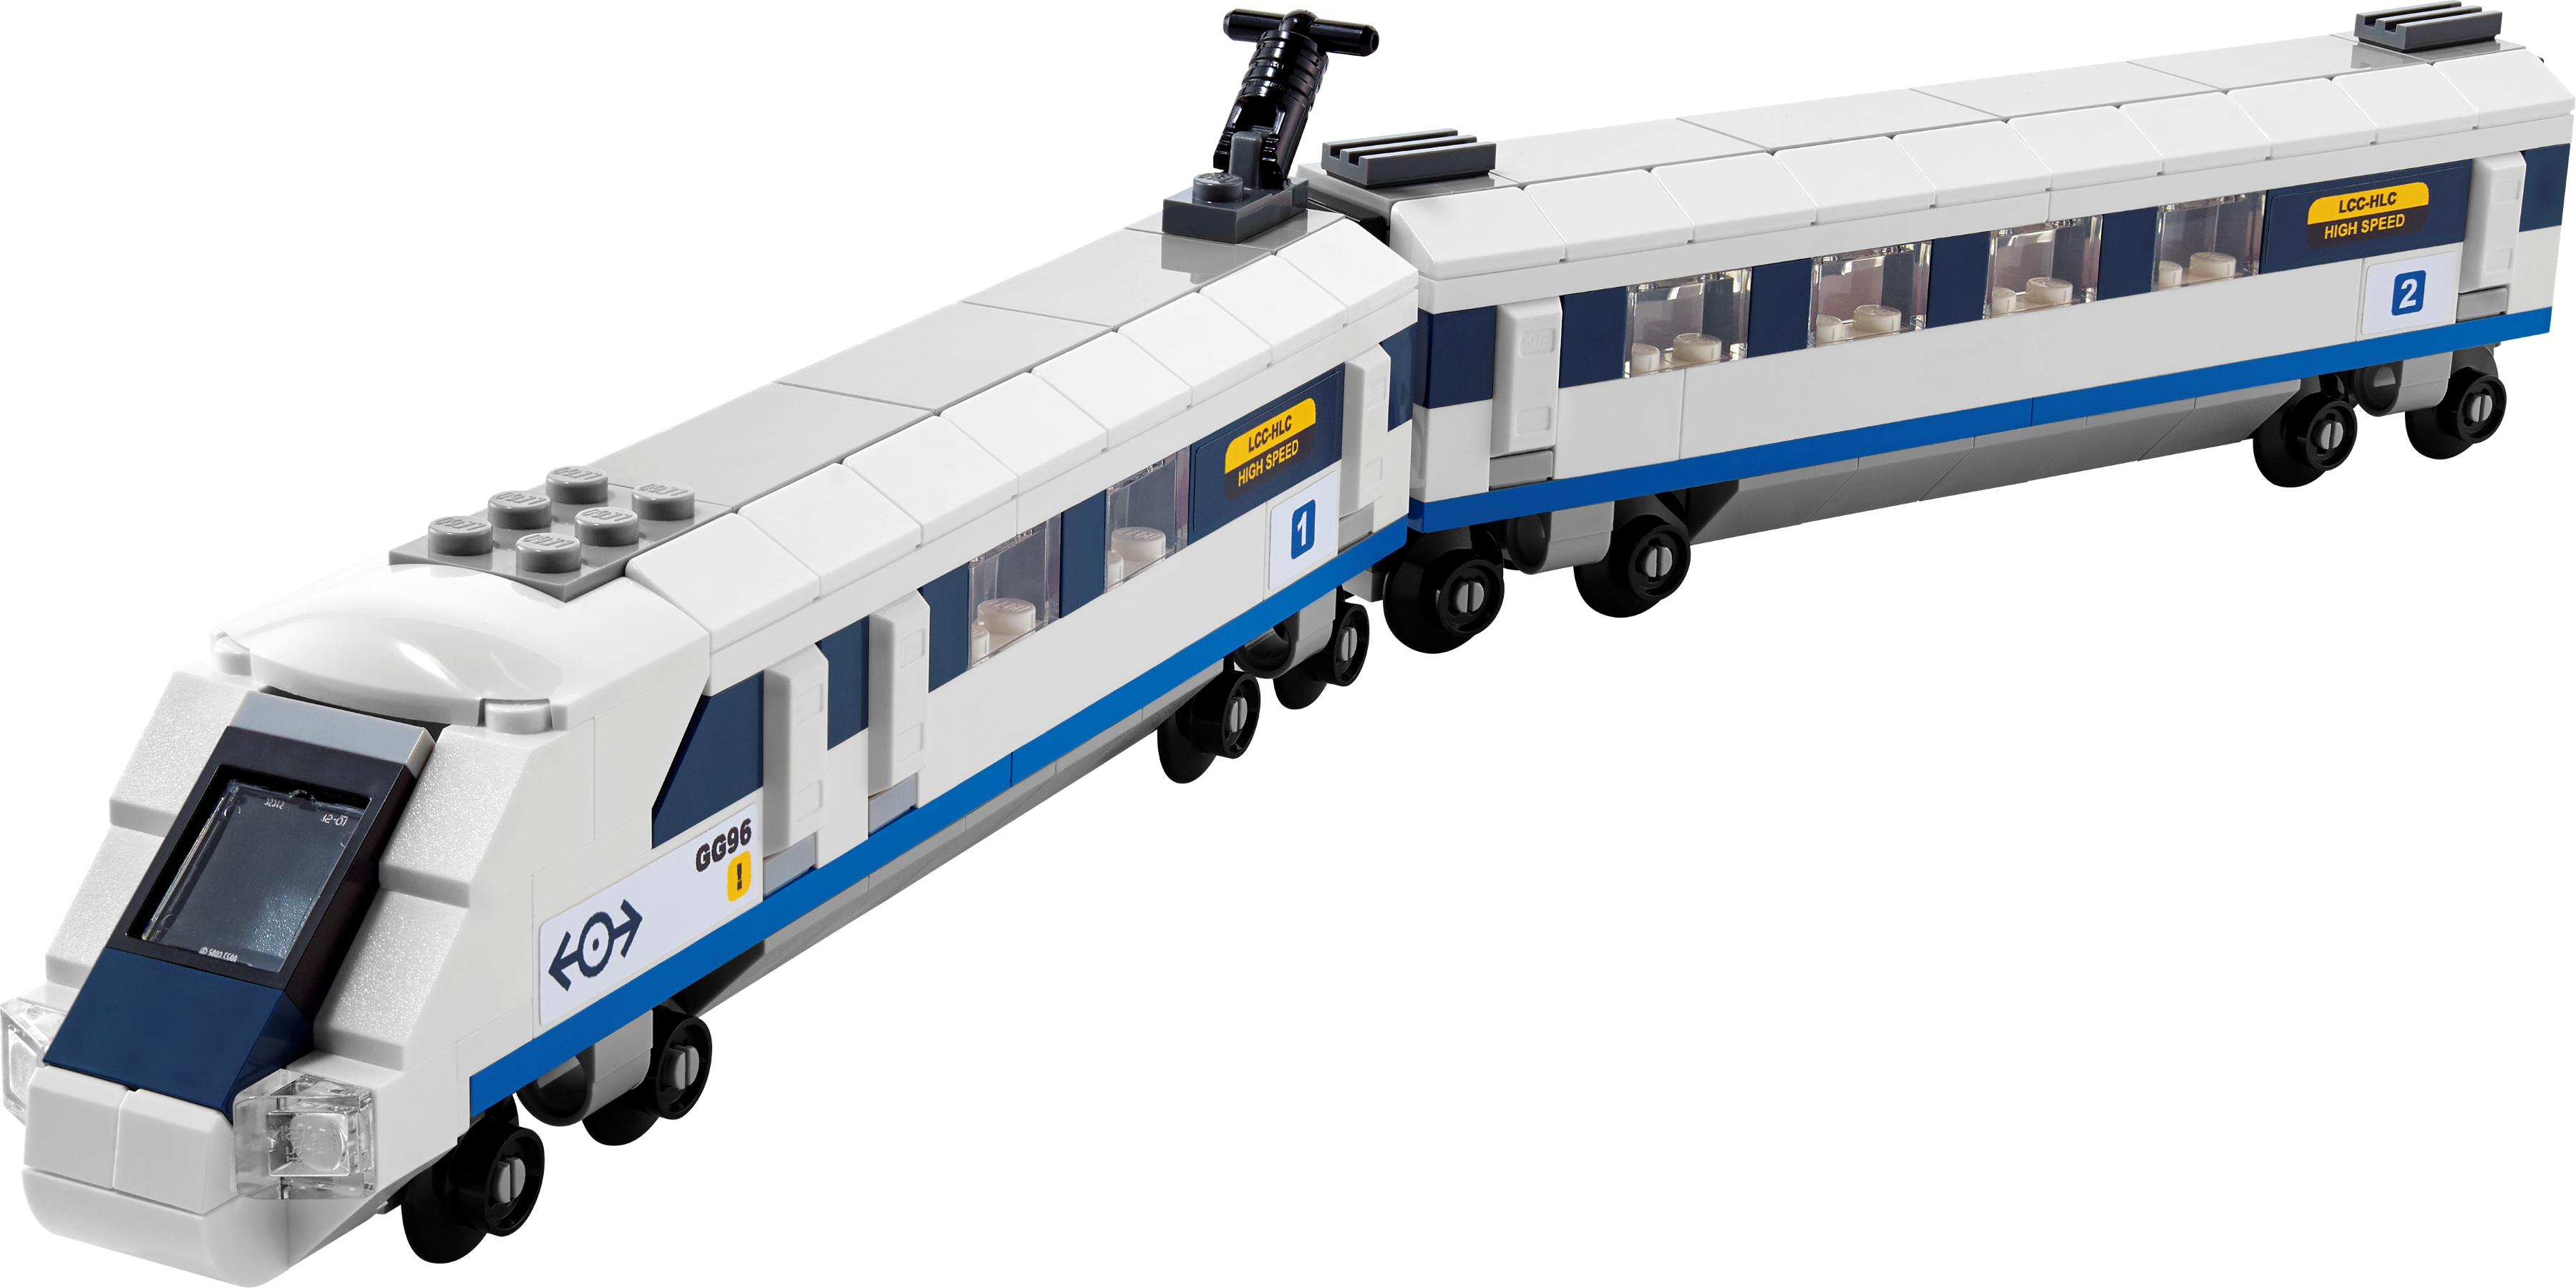 High-Speed Train 40518 Creator Expert | Buy online at the Official LEGO® Shop US